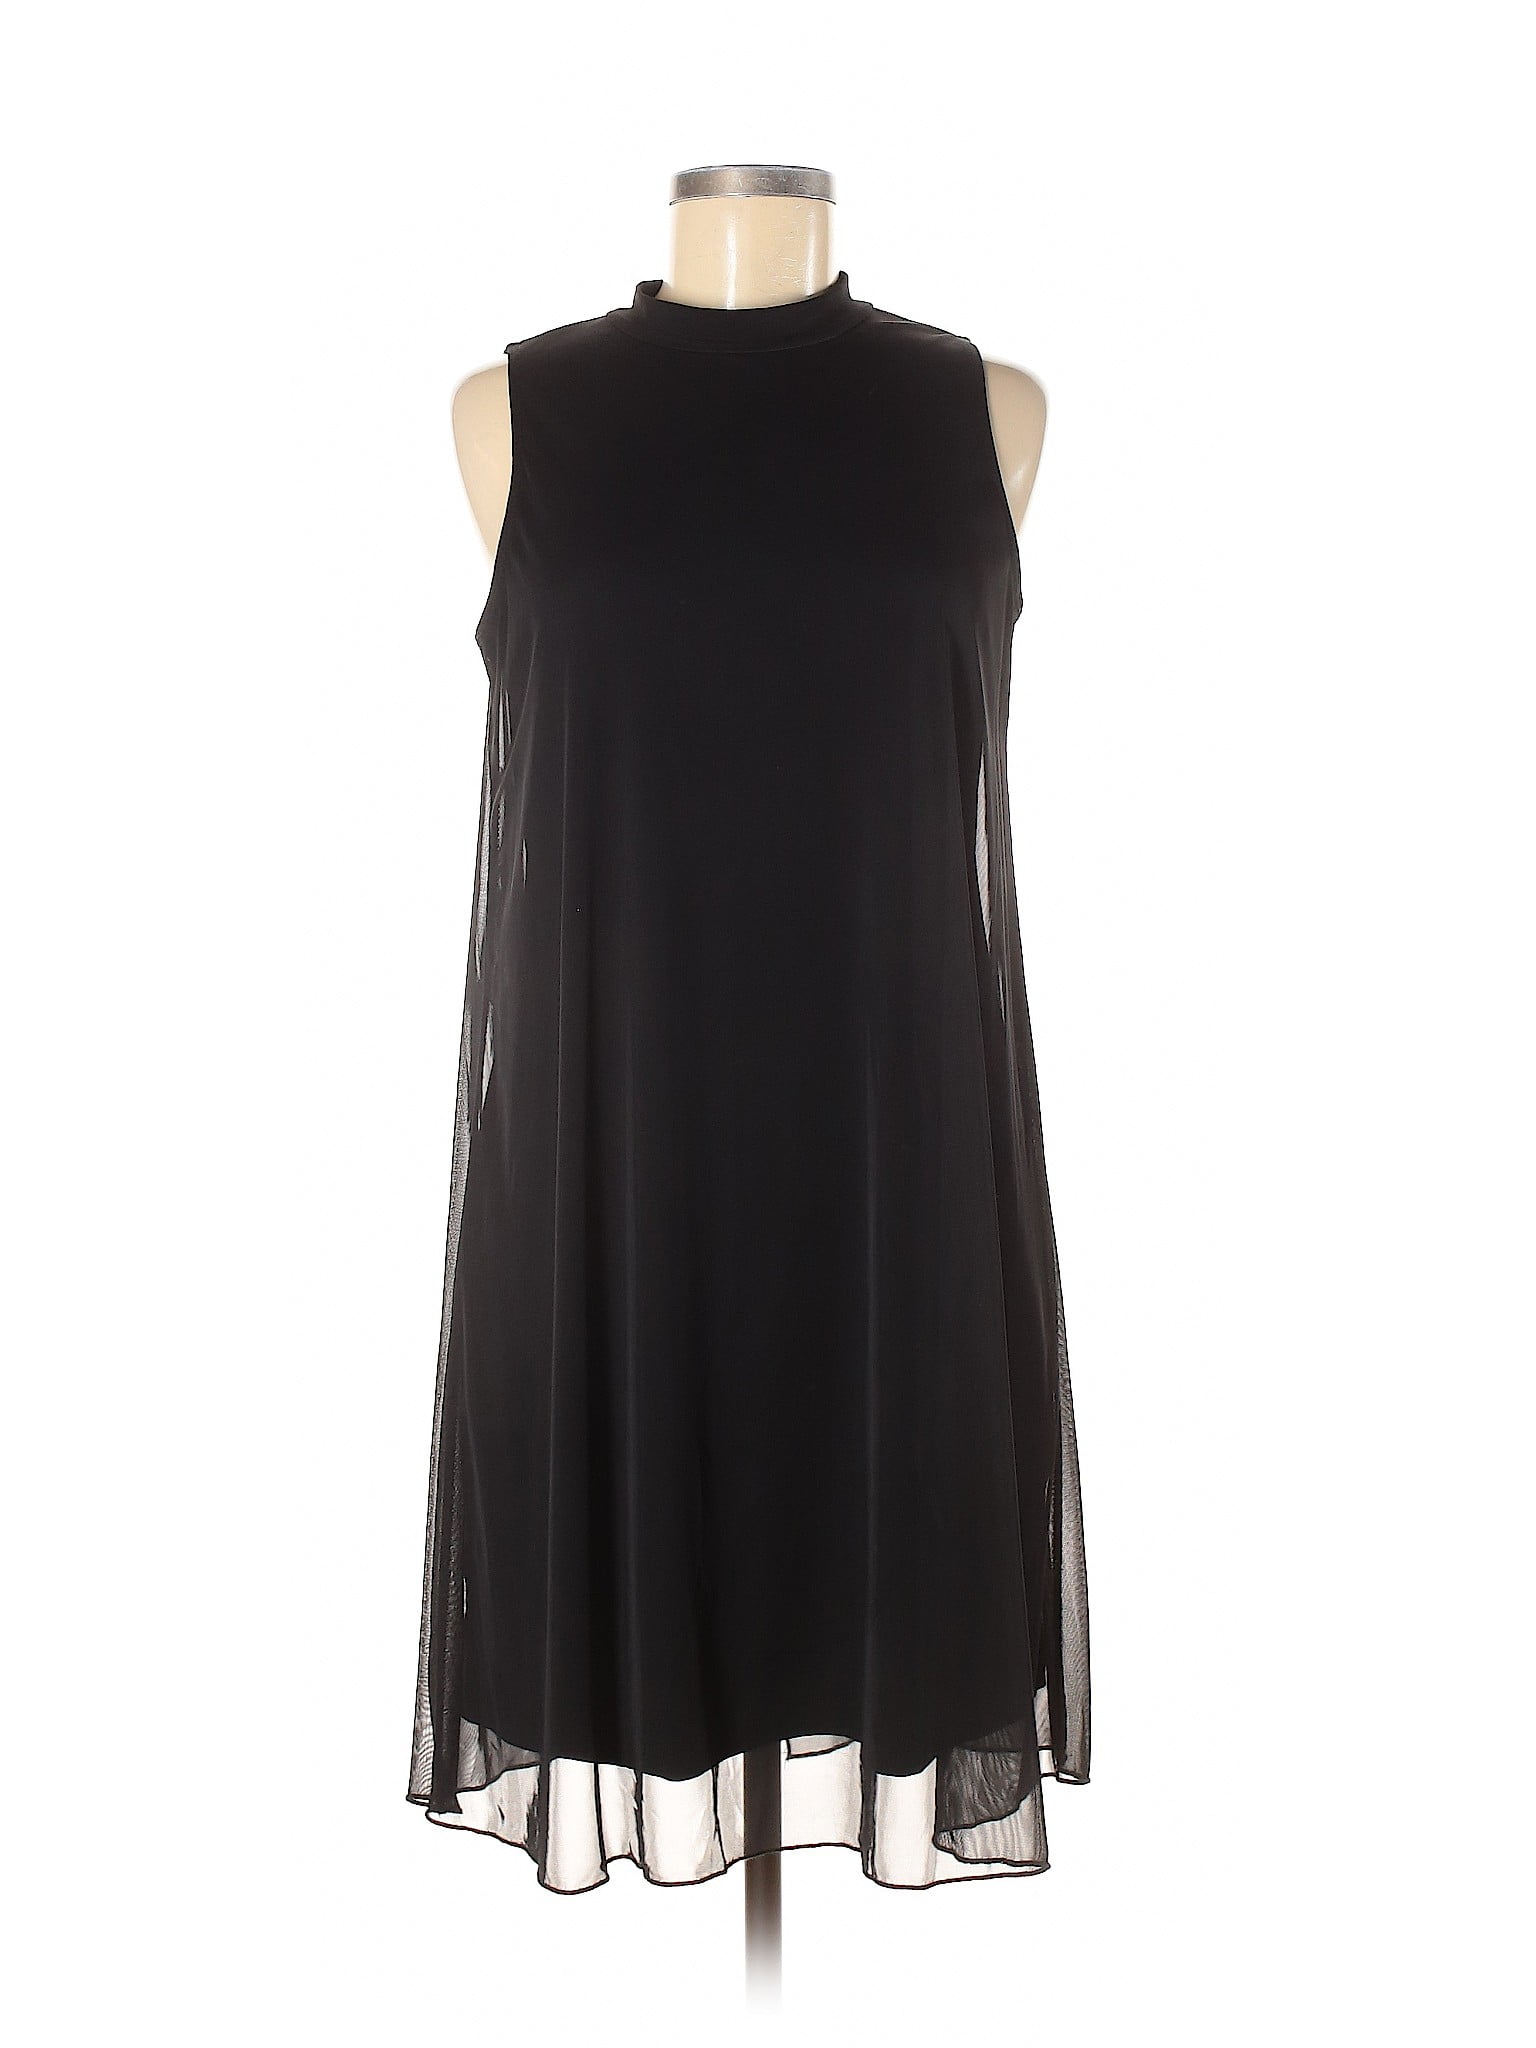 Nik and Nash - Pre-Owned Nik and Nash Women's Size M Casual Dress ...